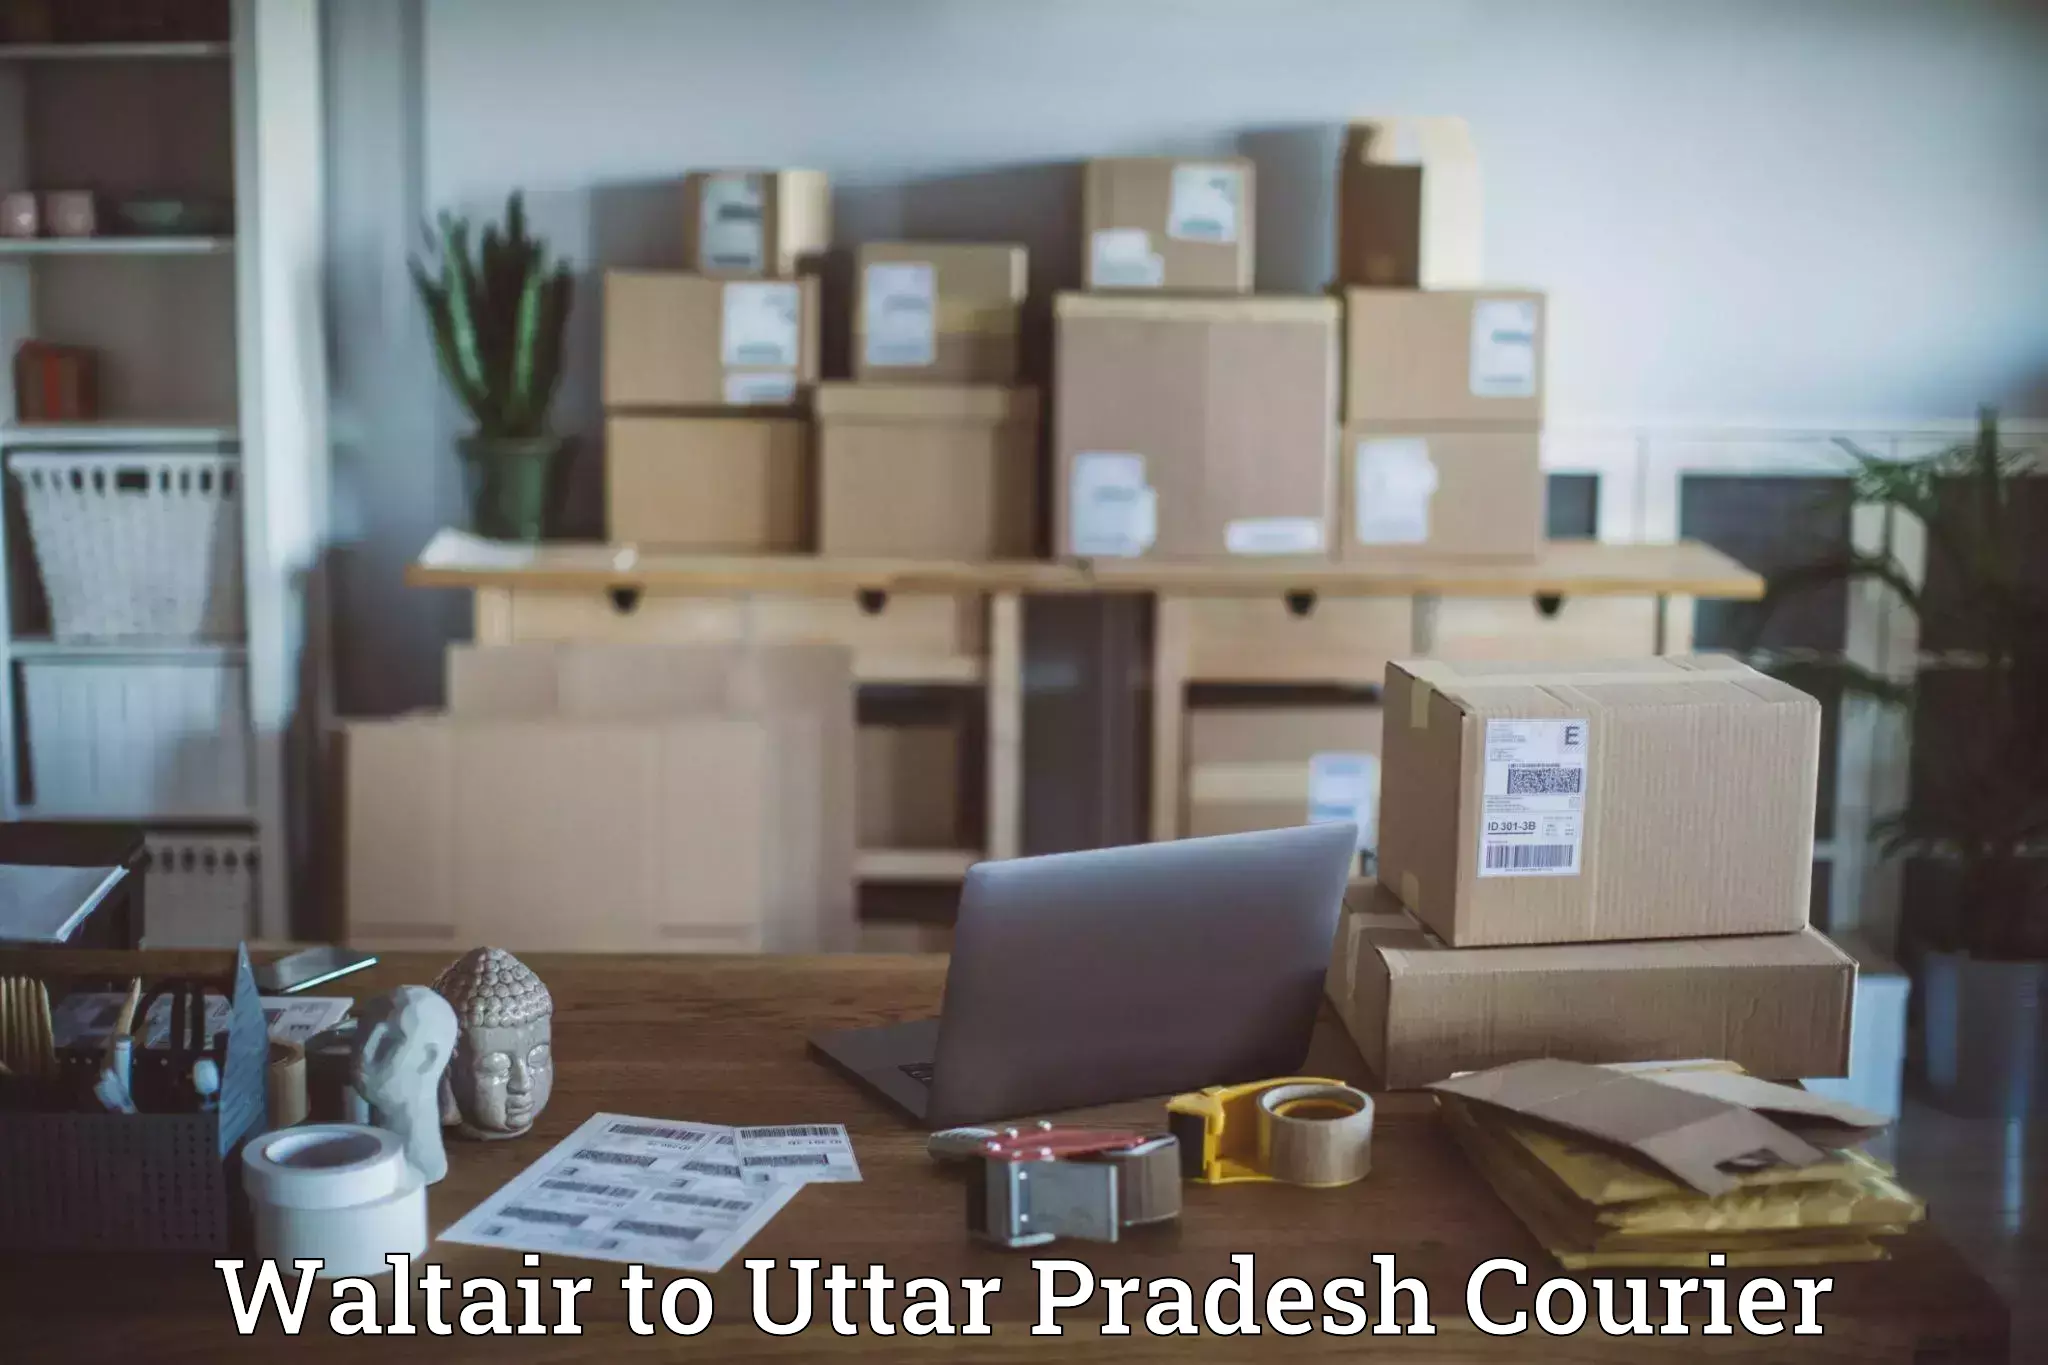 Quick parcel dispatch Waltair to Lucknow